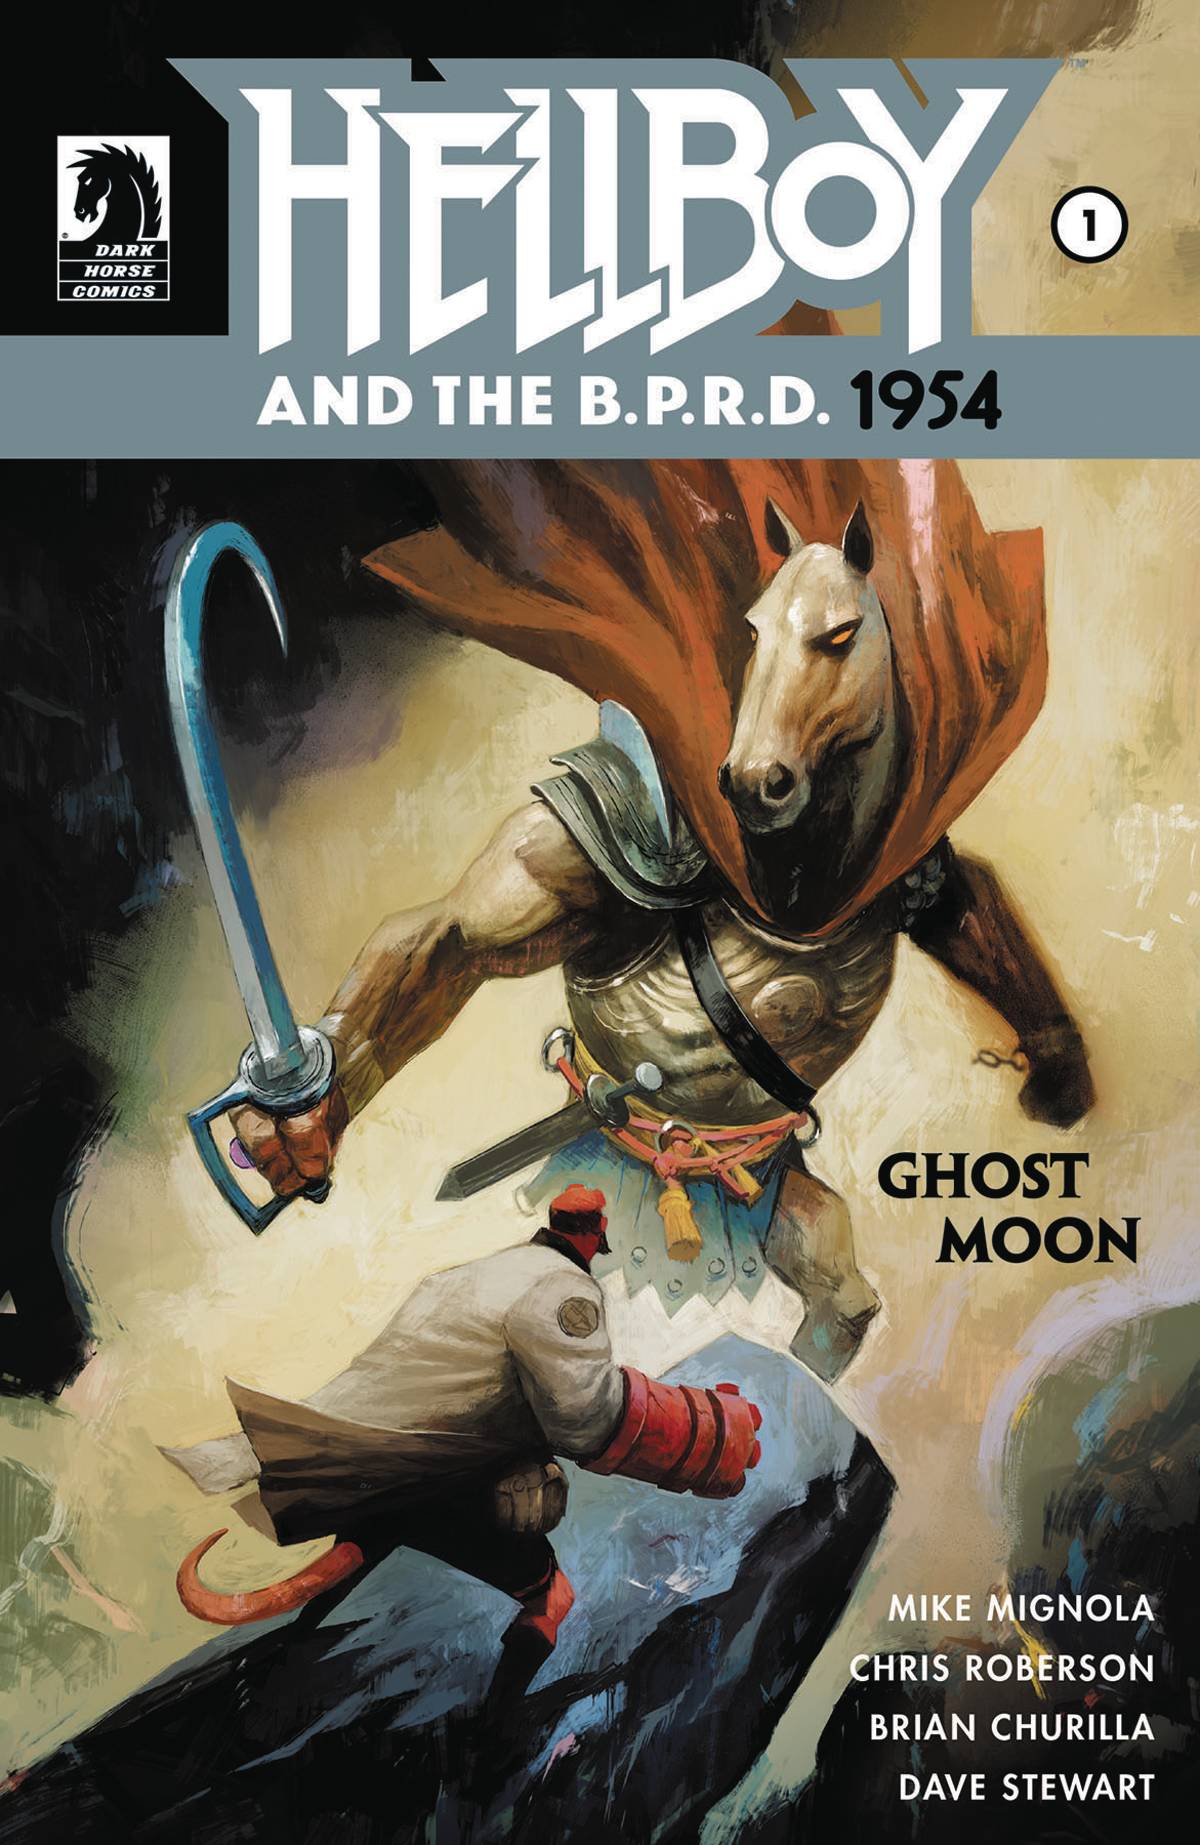 Hellboy & the B.P.R.D. Ongoing #16 Hellboy And B.P.R.D. 1954 Ghost Moon #1